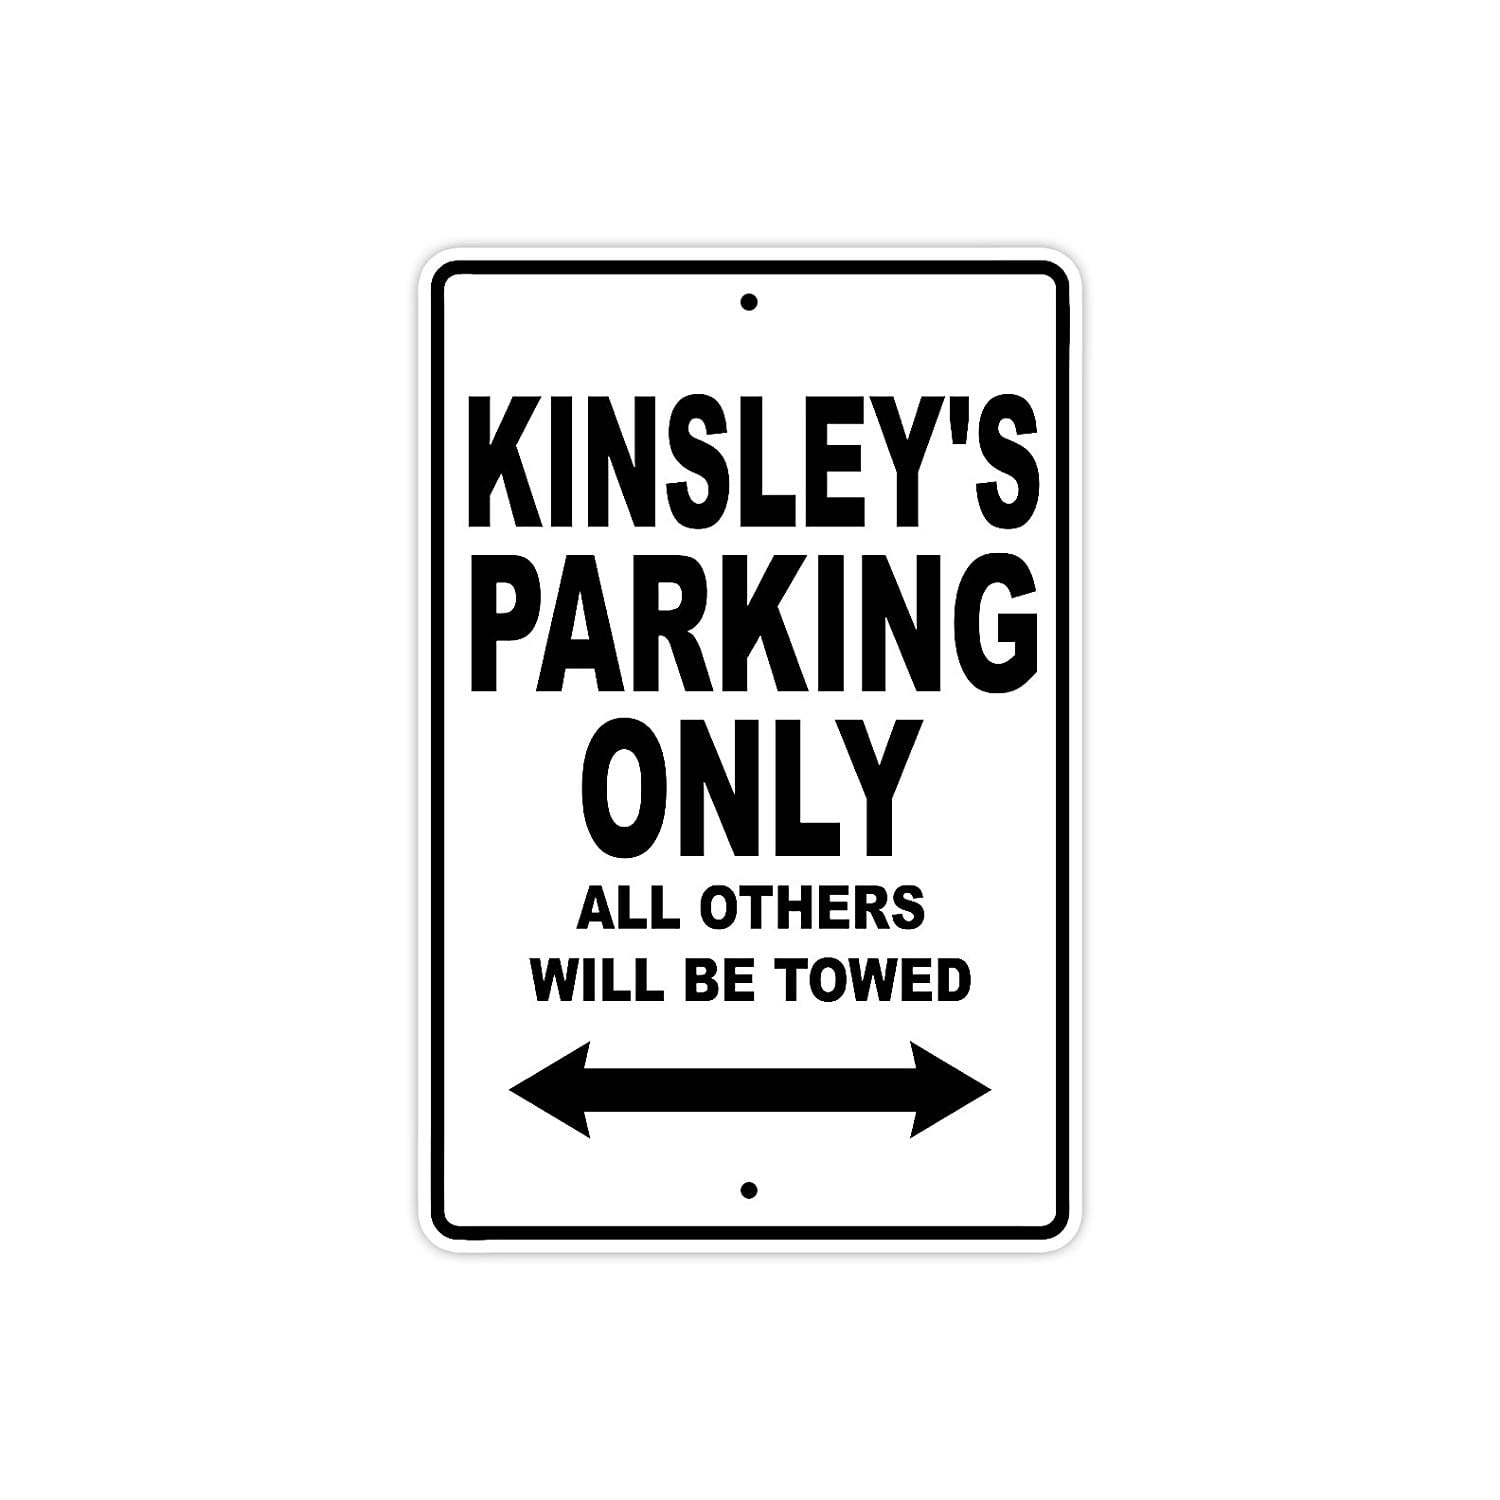 RN Parking Only All Others Towed Gift Decor Novelty Garage Aluminum Metal Sign 